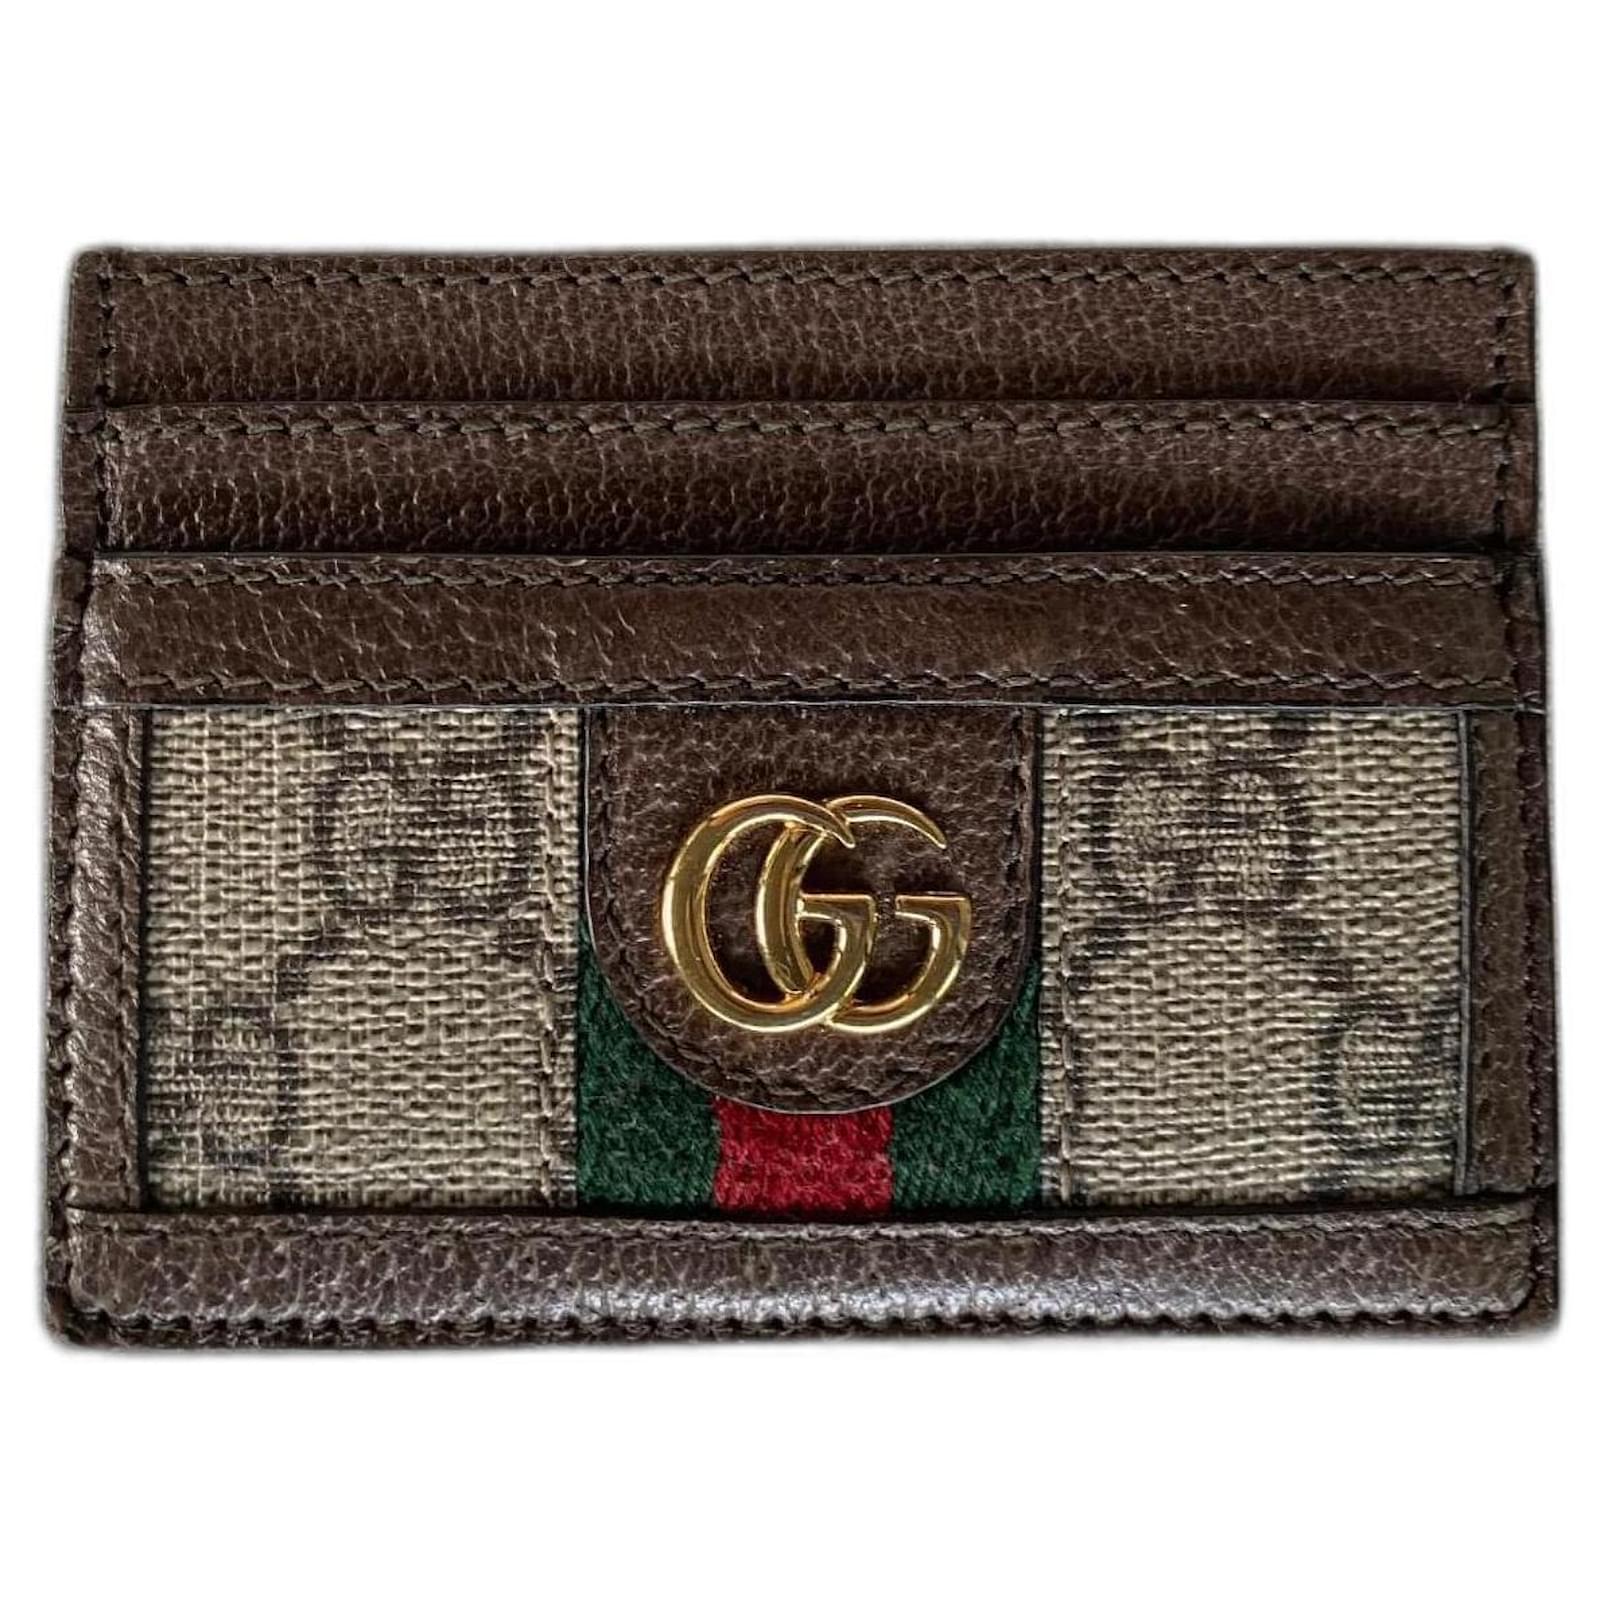 Card case with GG detail in beige and ebony Supreme